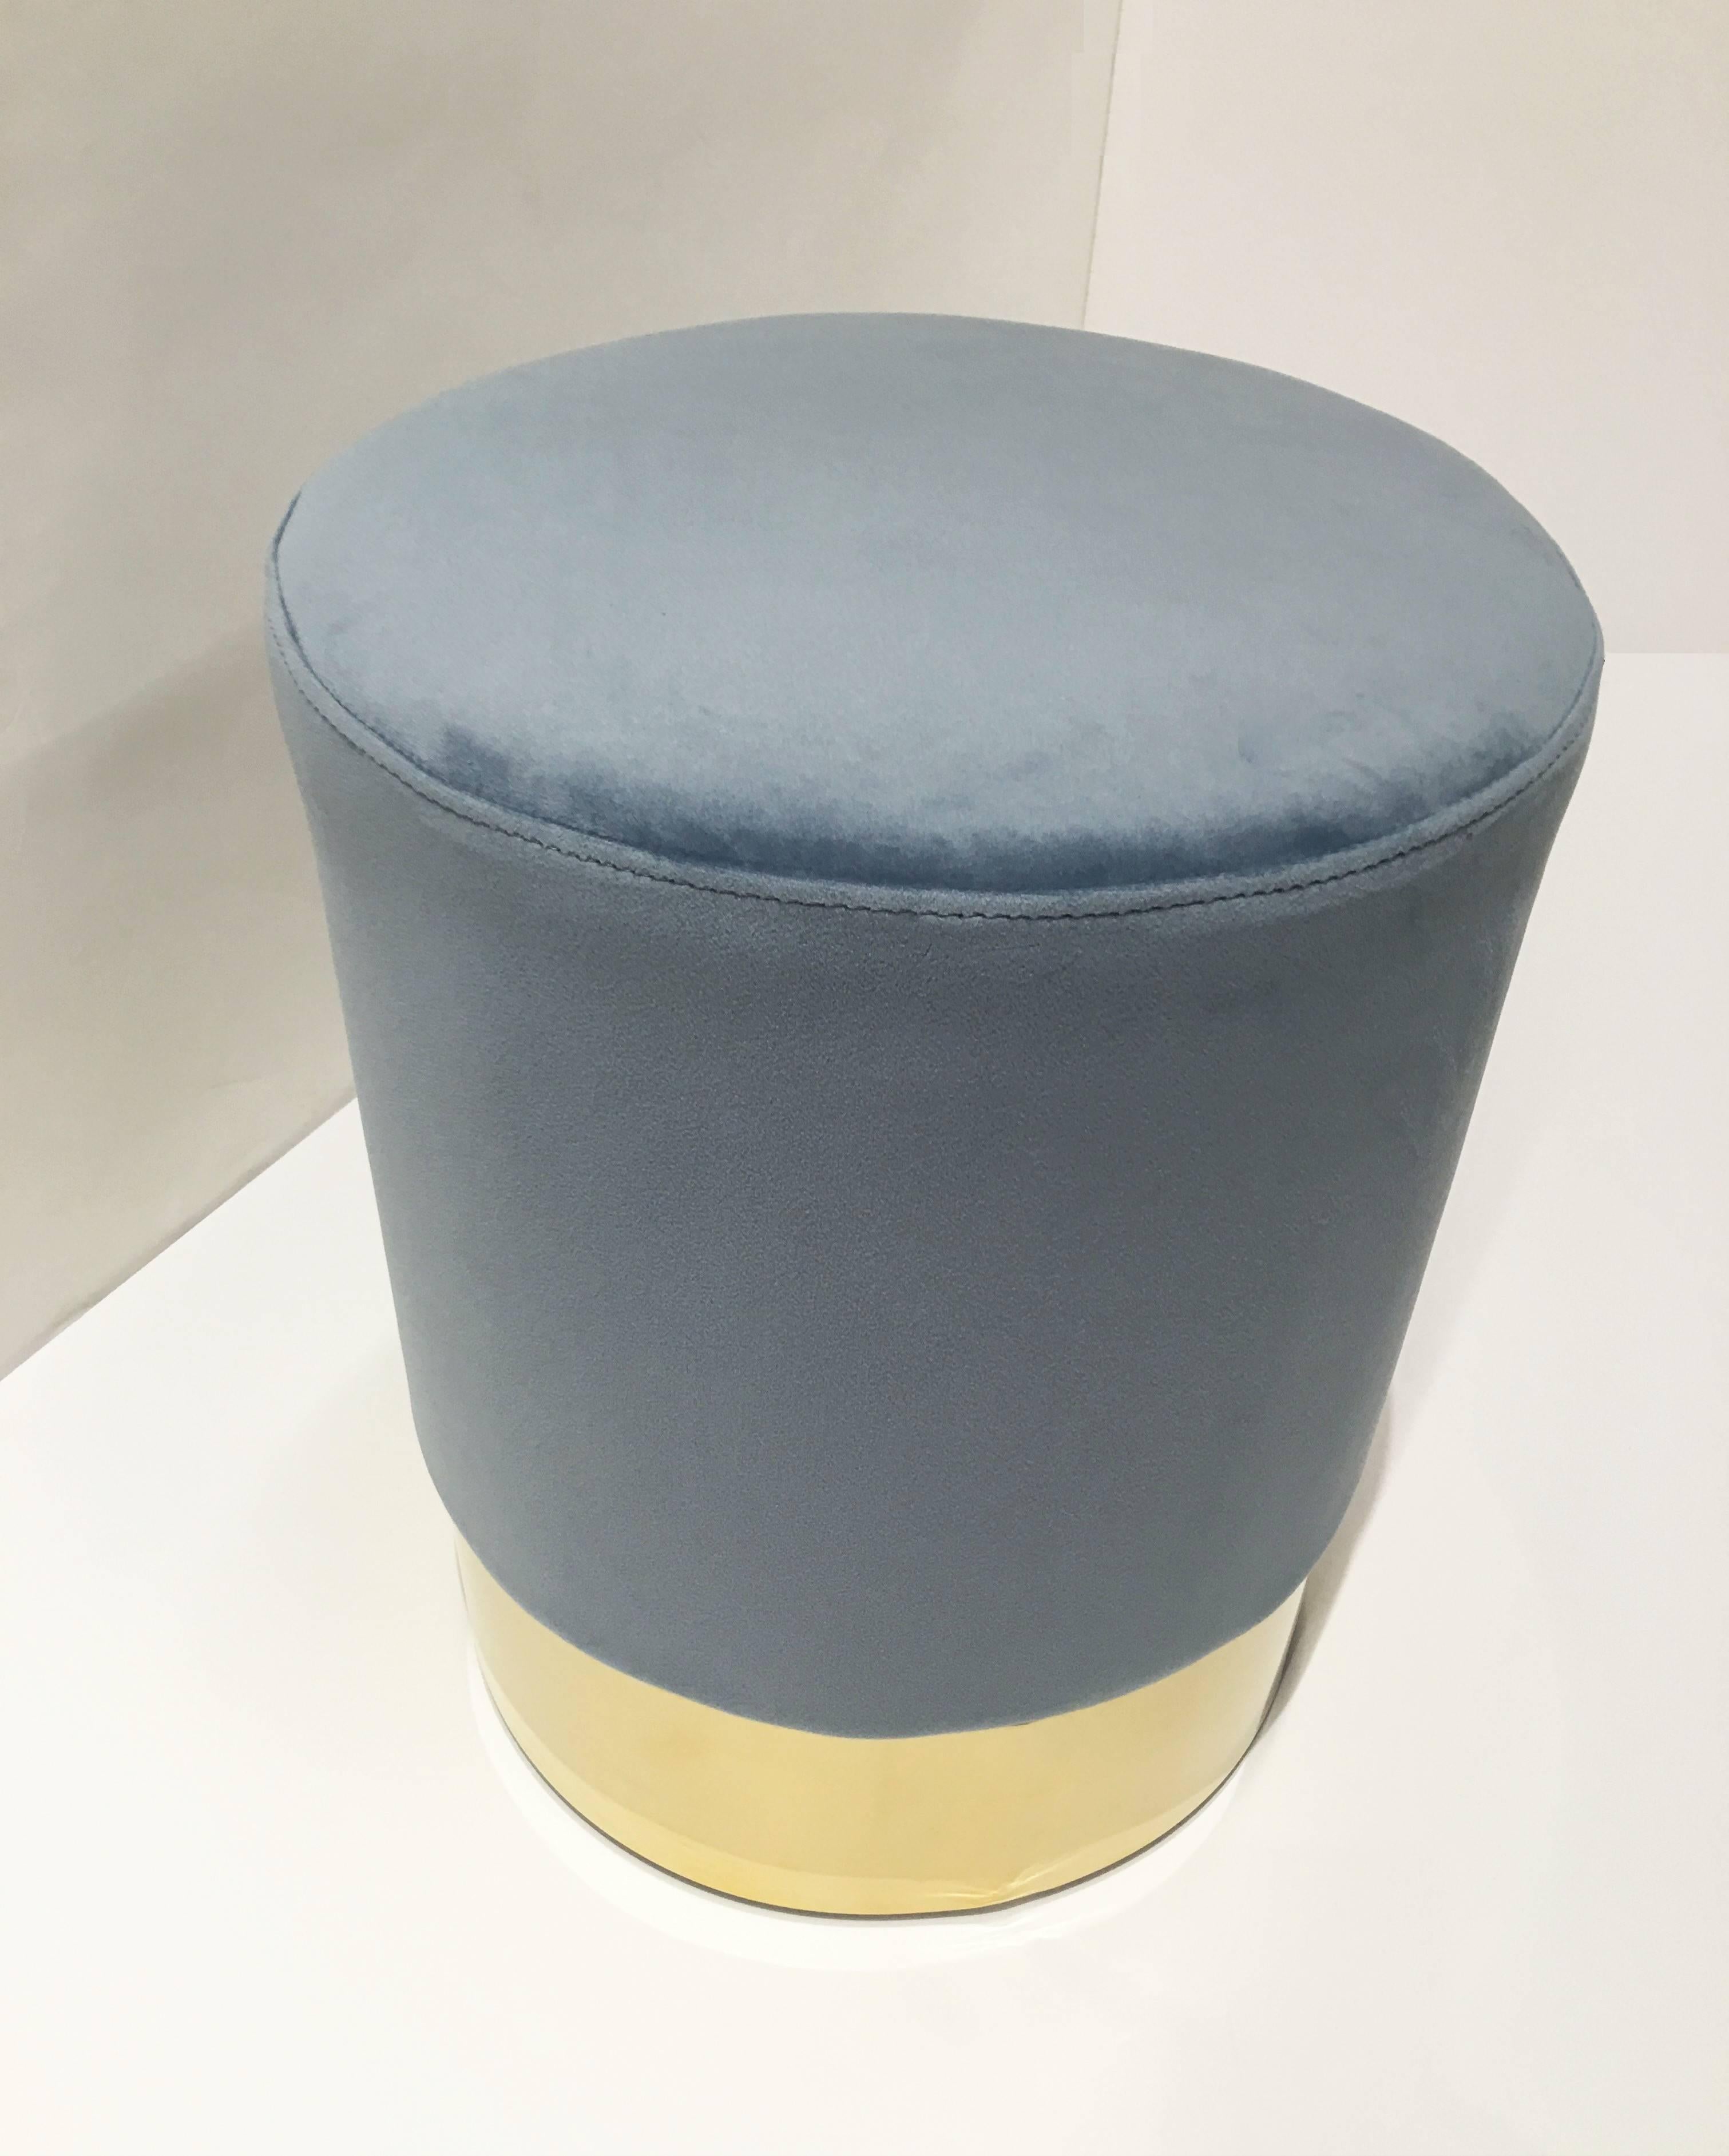 Azucena stool upholstered in velvet textile on a brass base. Designed by Luigi Caccia Dominioni in 1963. Contemporary production by Azucena.